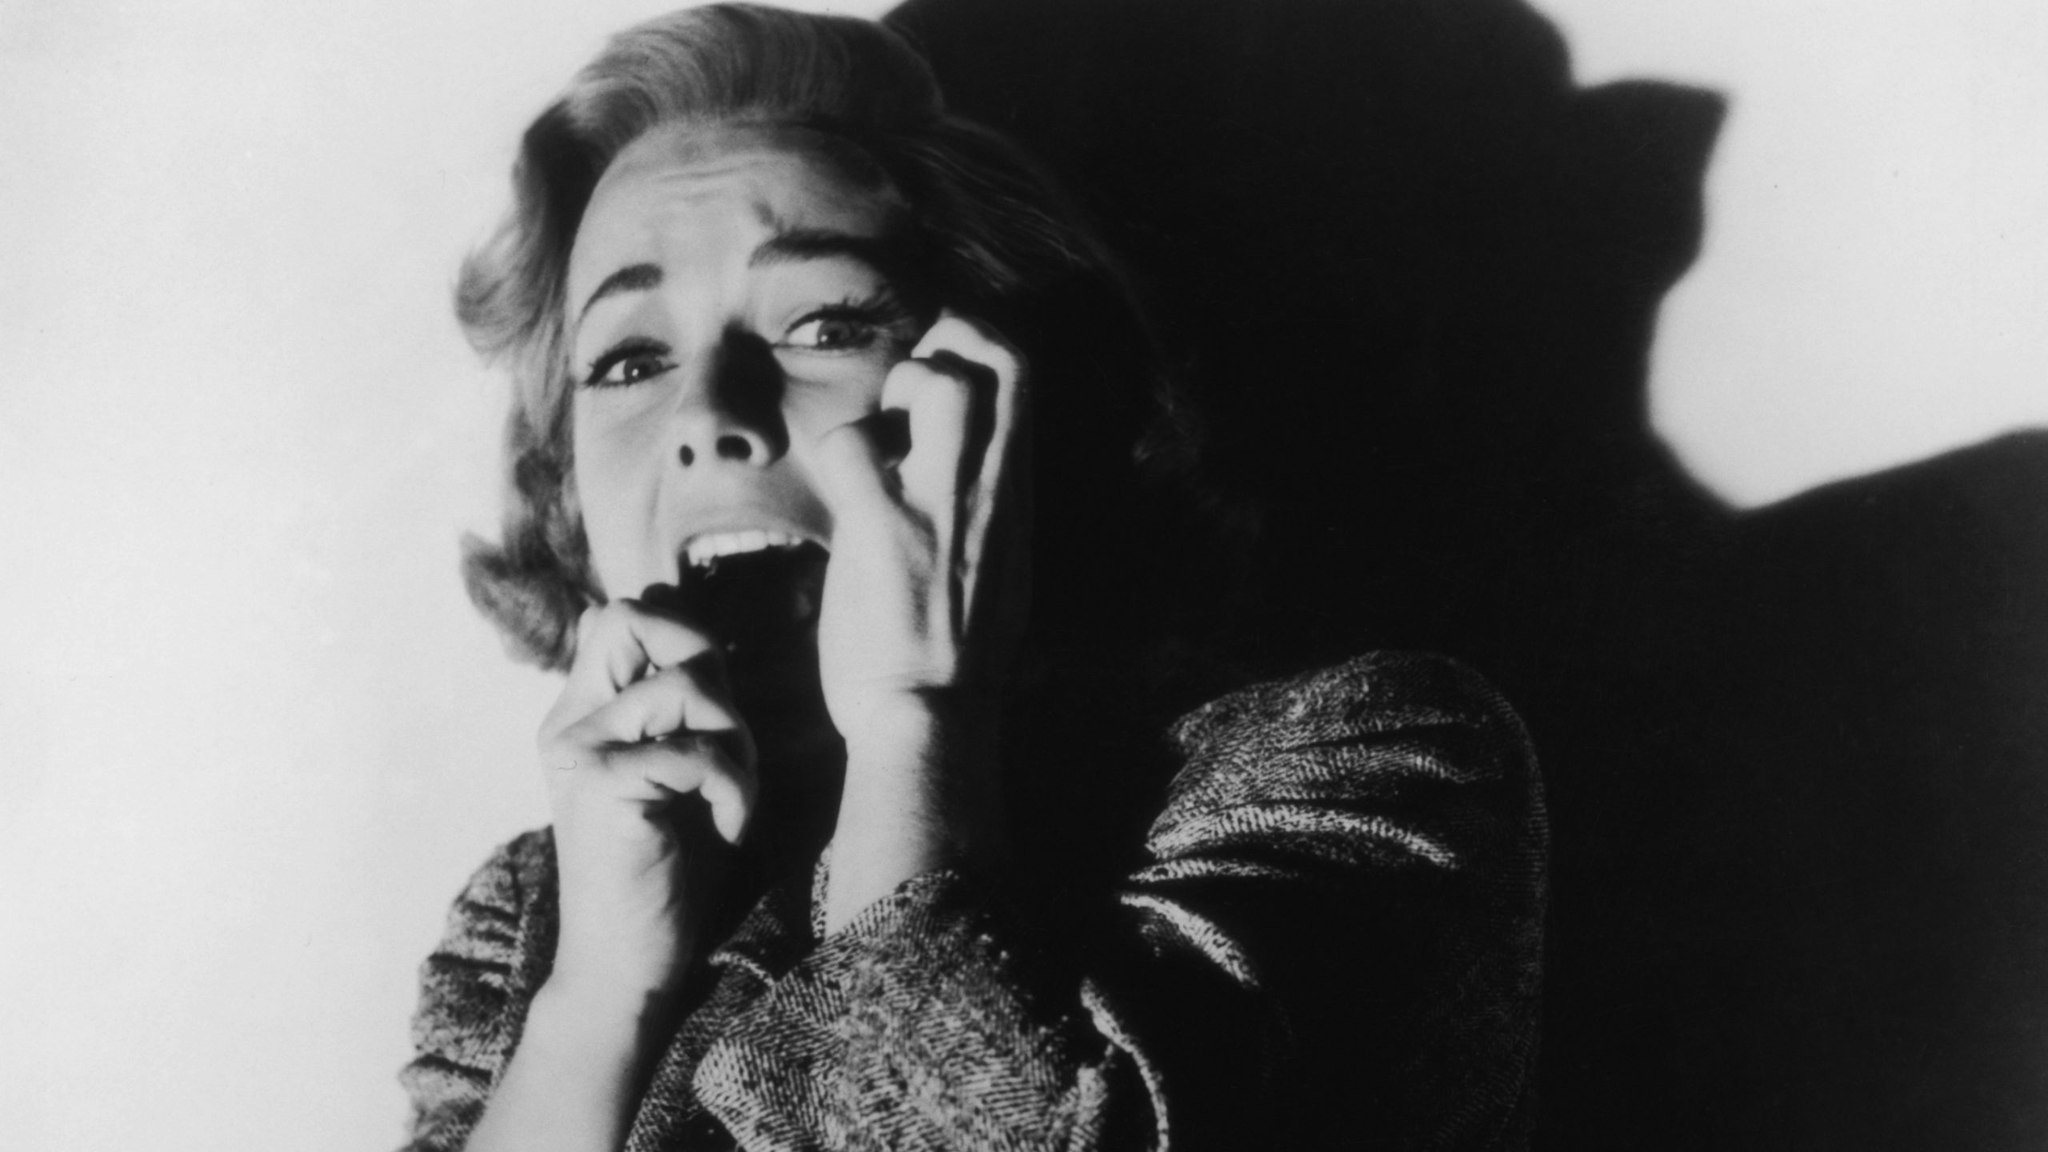 American actress Vera Miles stars as Lila Crane in the horror classic 'Psycho', directed by Alfred Hitchcock, 1960.